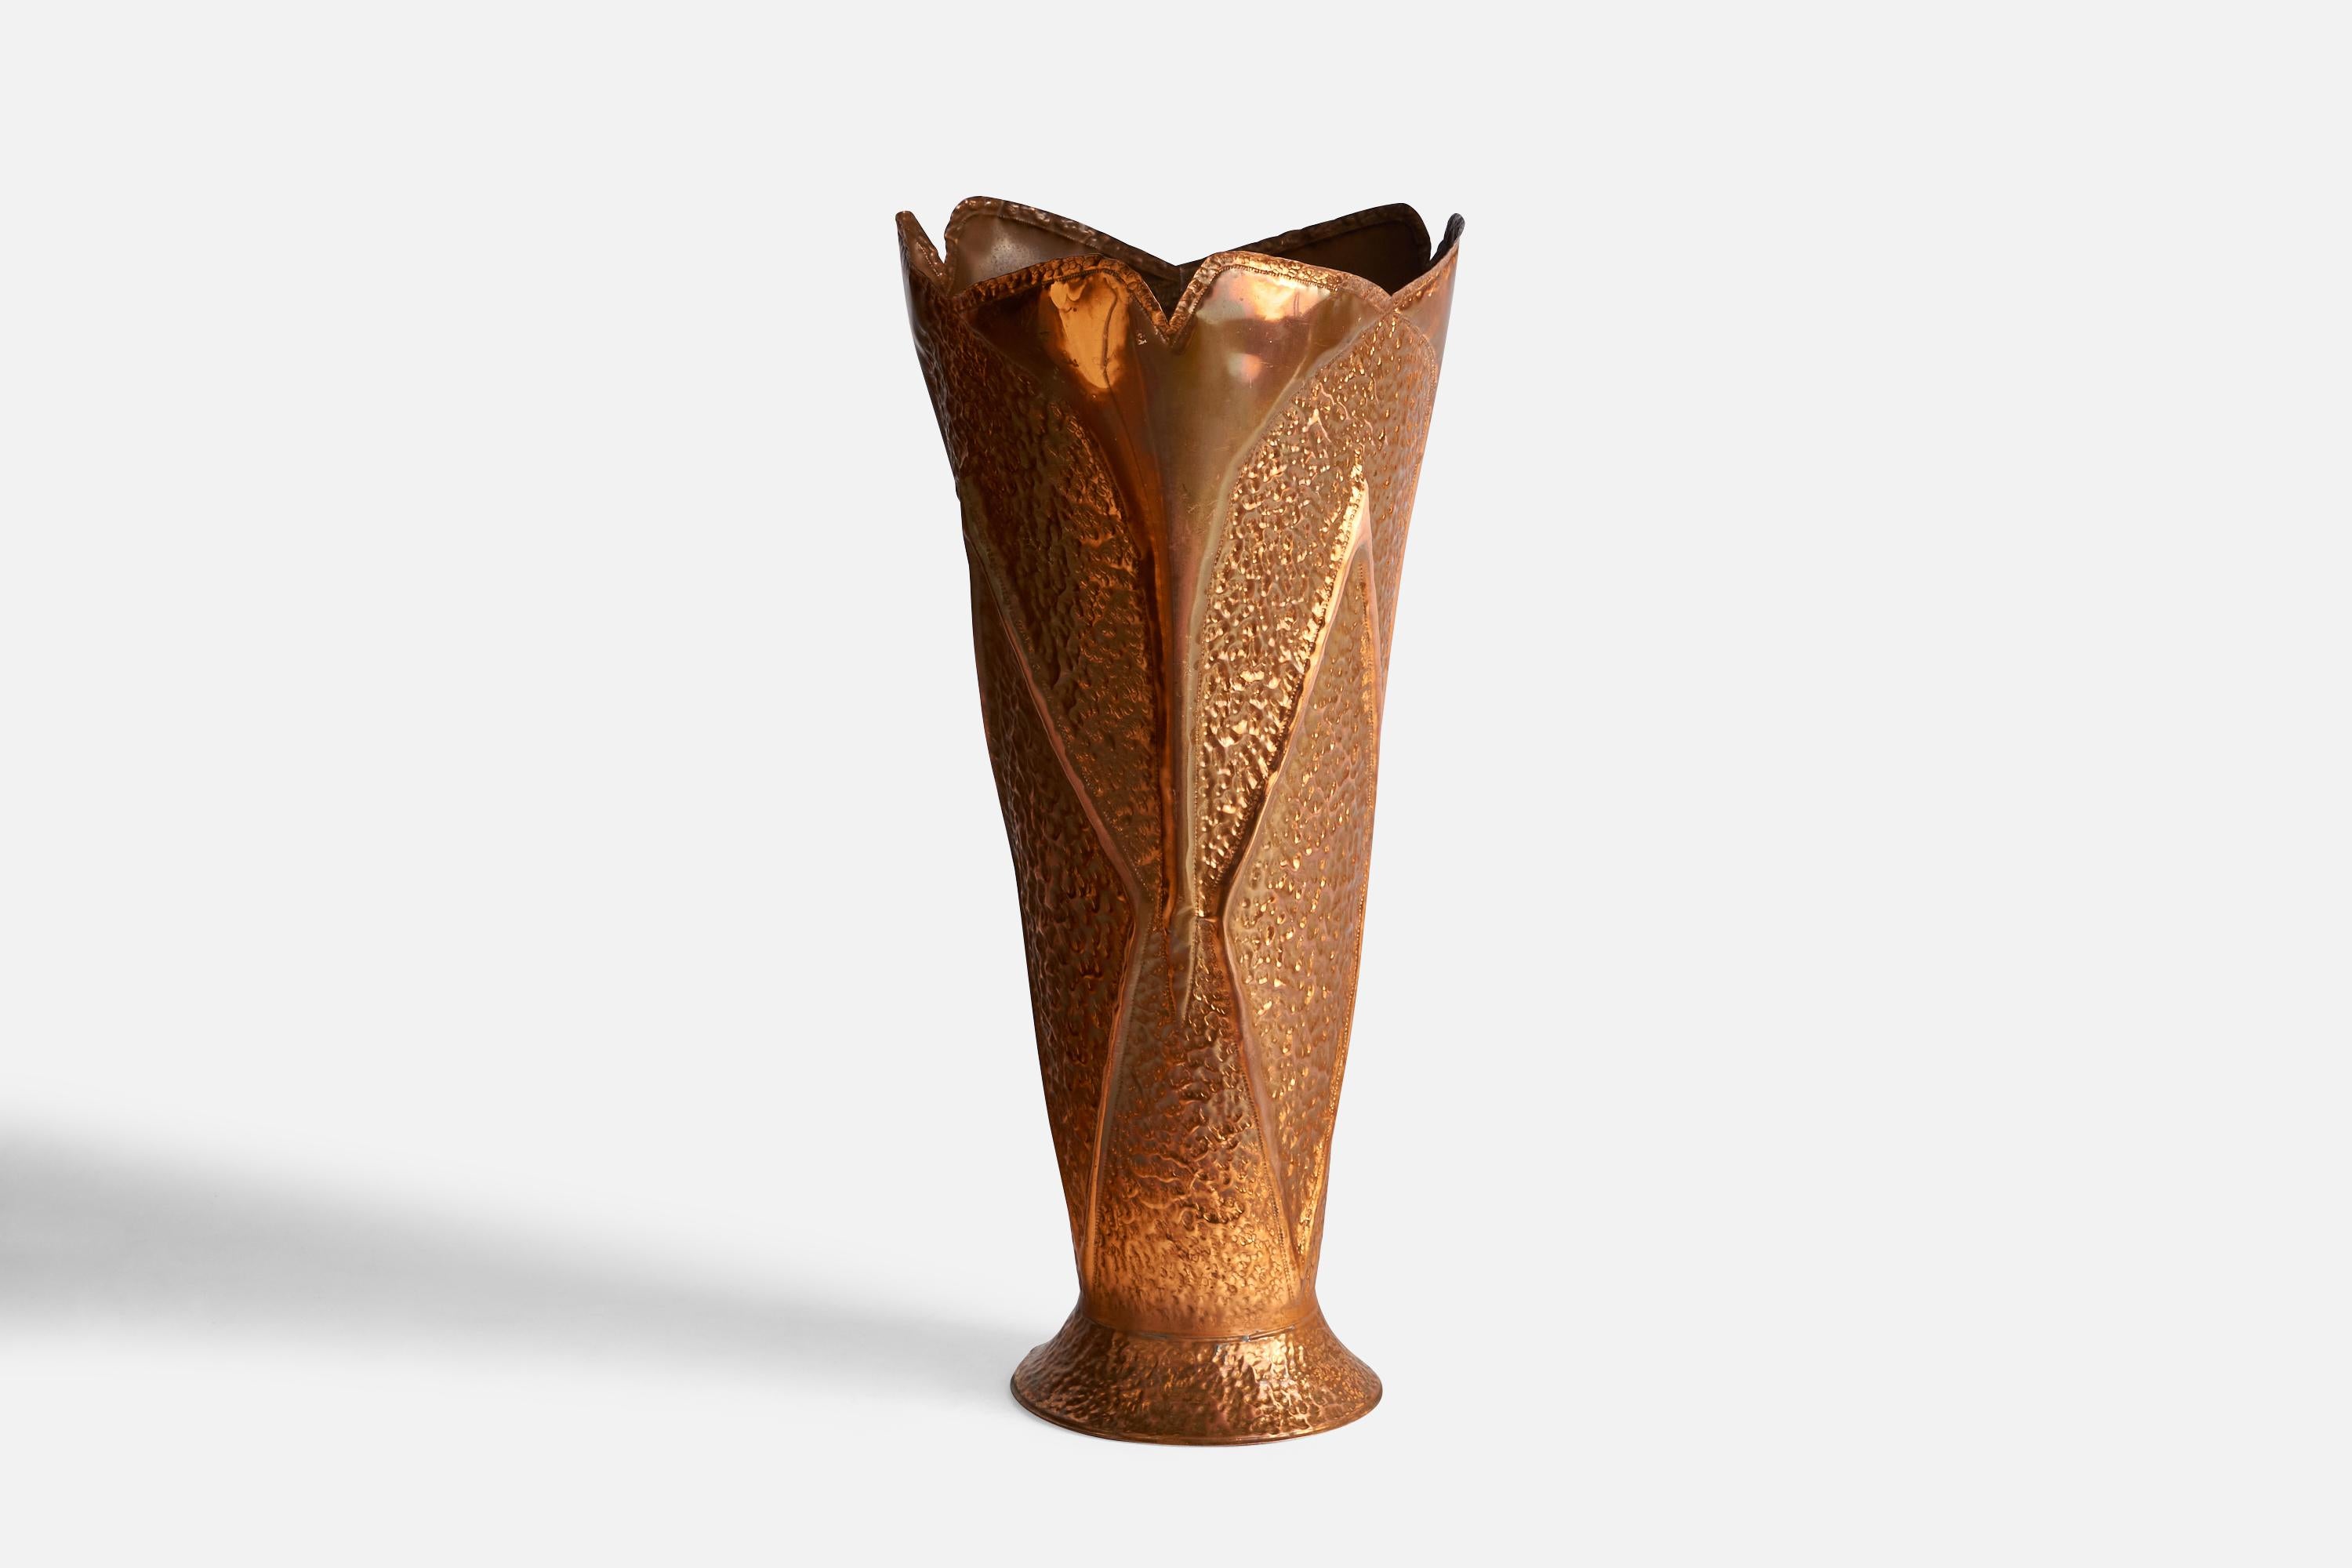 A hammered copper umbrella stand designed and produced in Italy, c. 1960s.